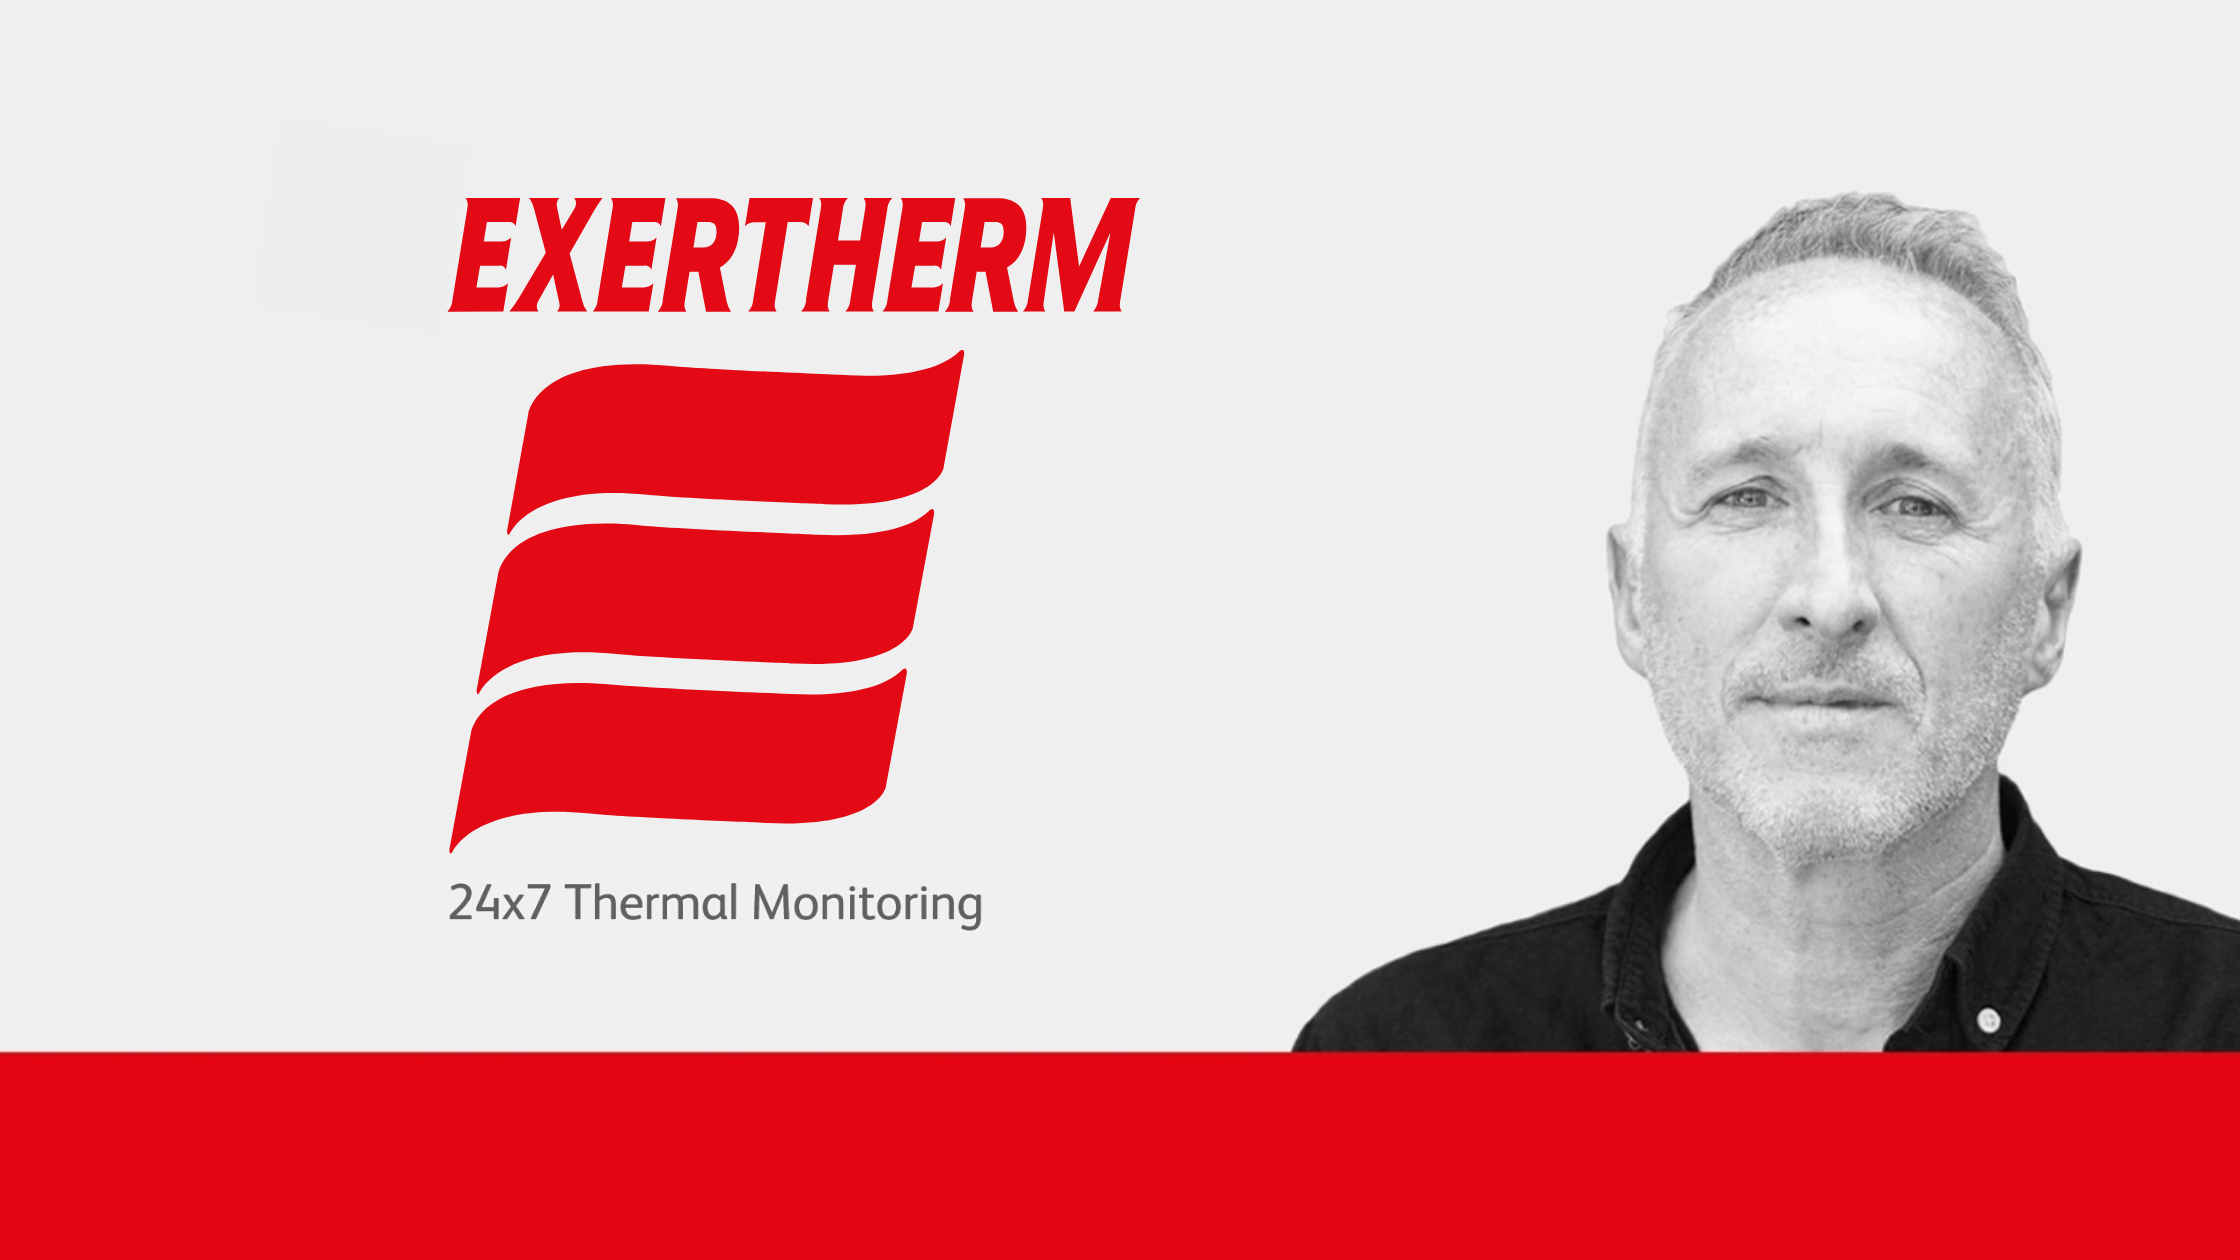 Alan Moug appointed CEO to Accelerate Next Phase of Exertherm Growth